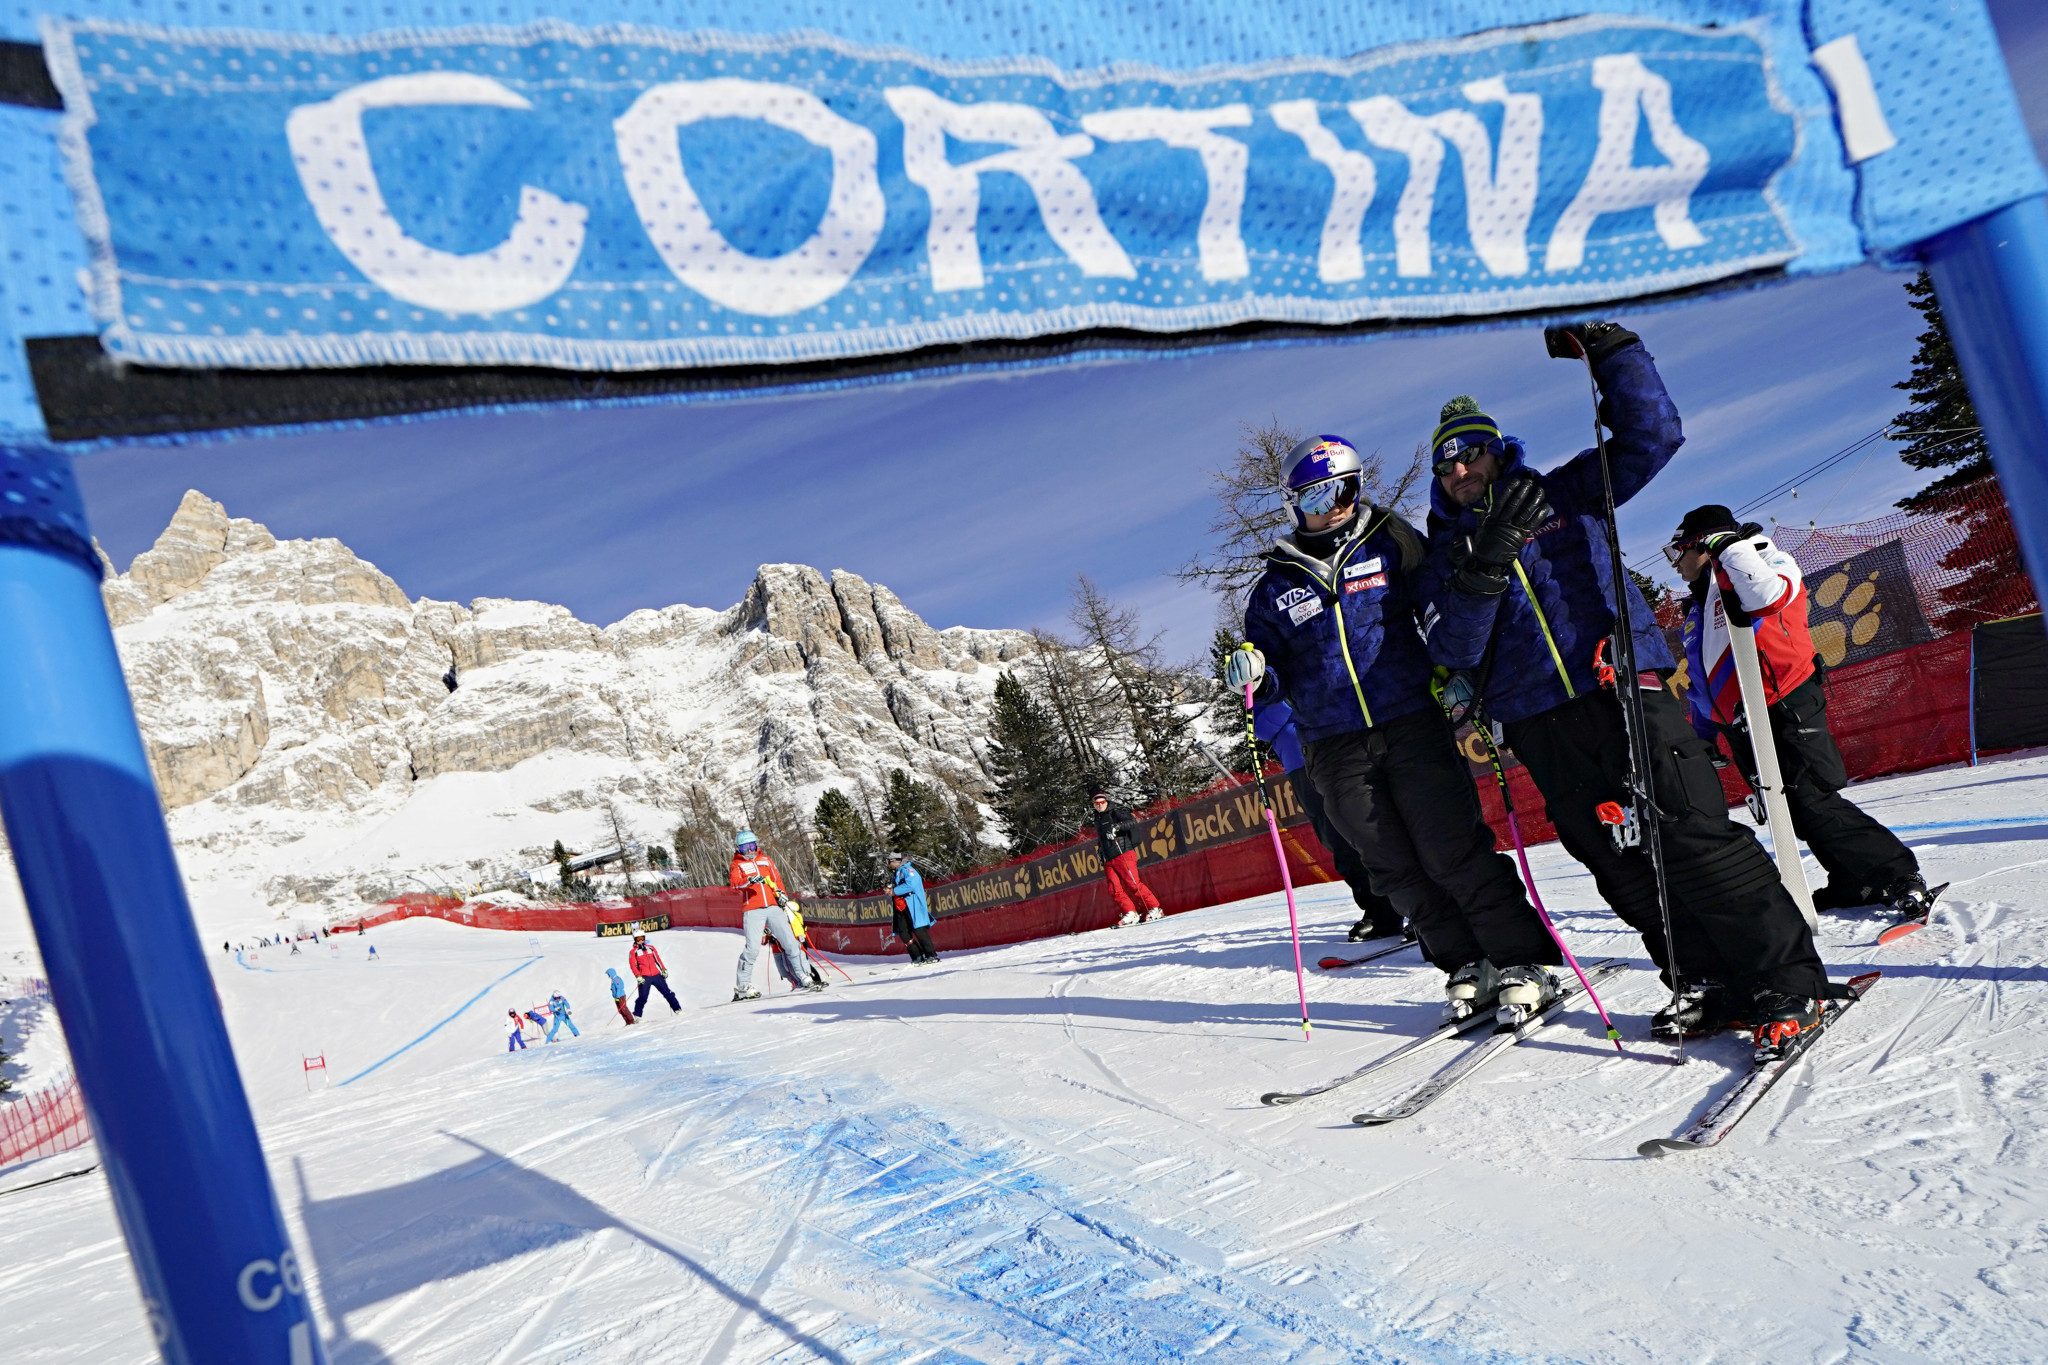 Cortina d’Ampezzo will be home to the longest skiable link in the world ©Getty Images